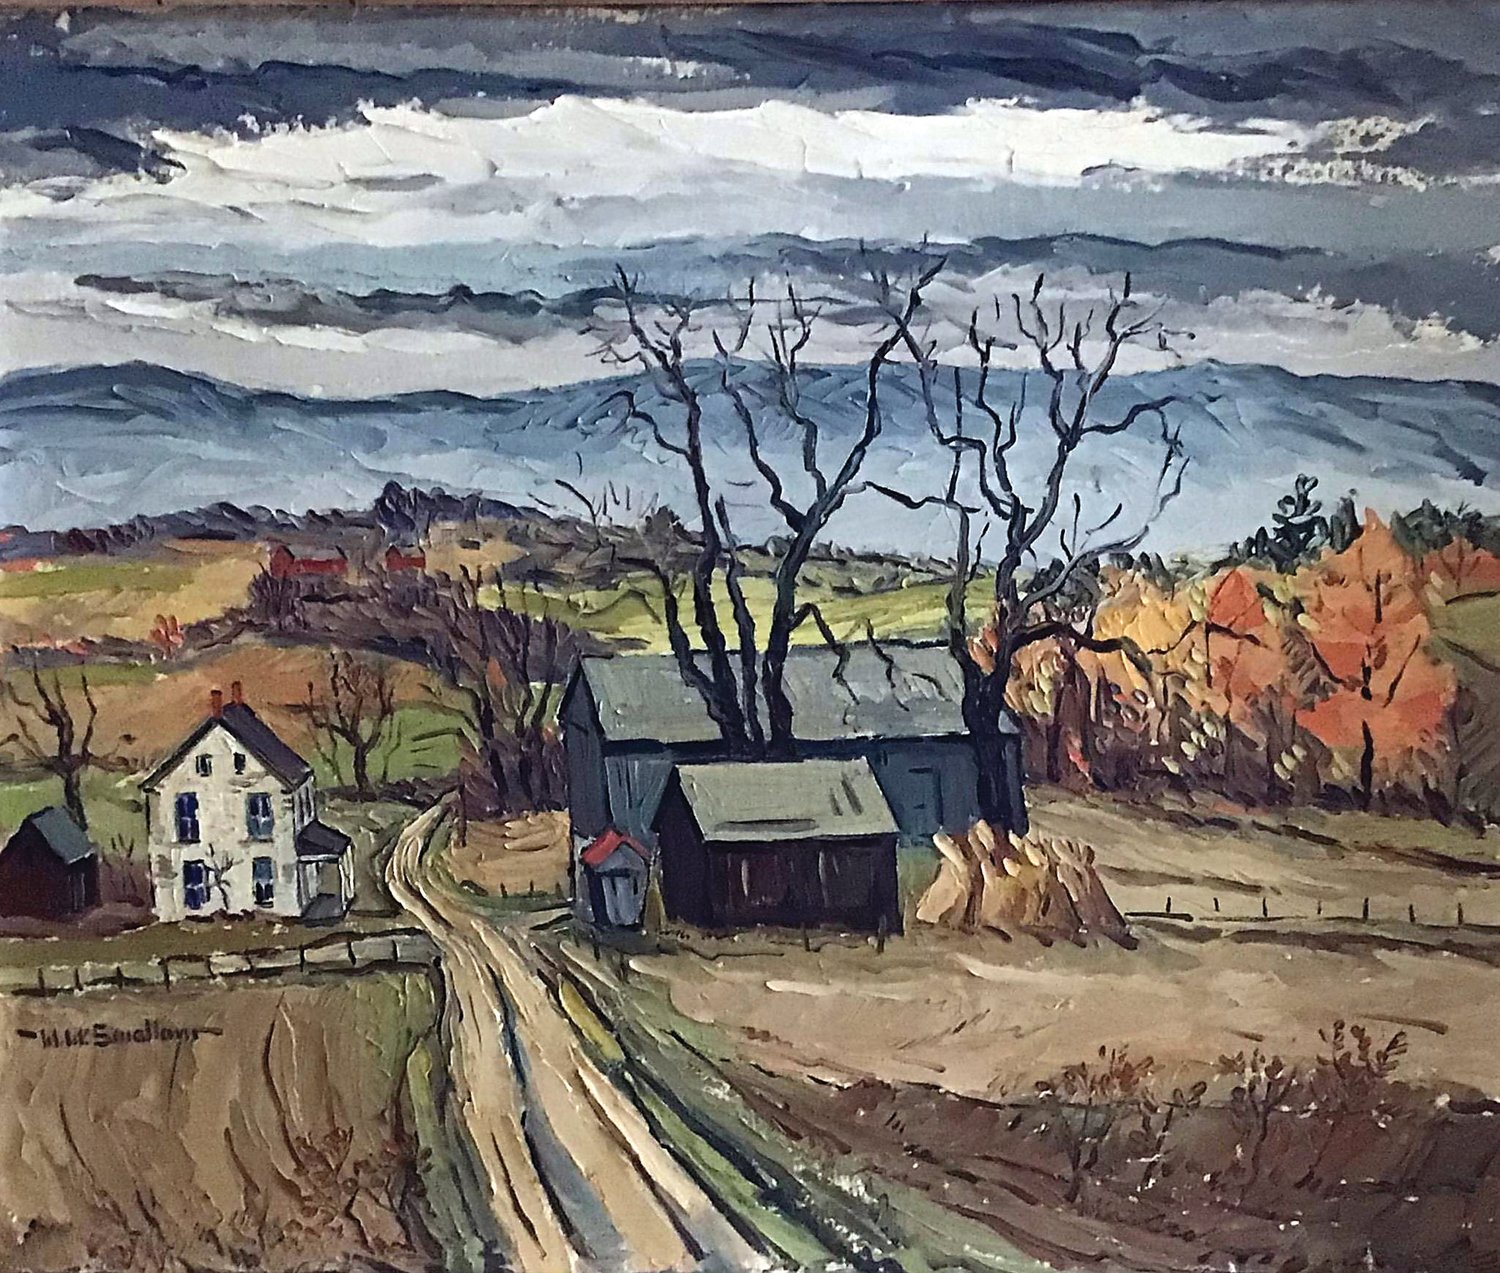 “Country Road” is an oil painting by William Weldon Swallow.